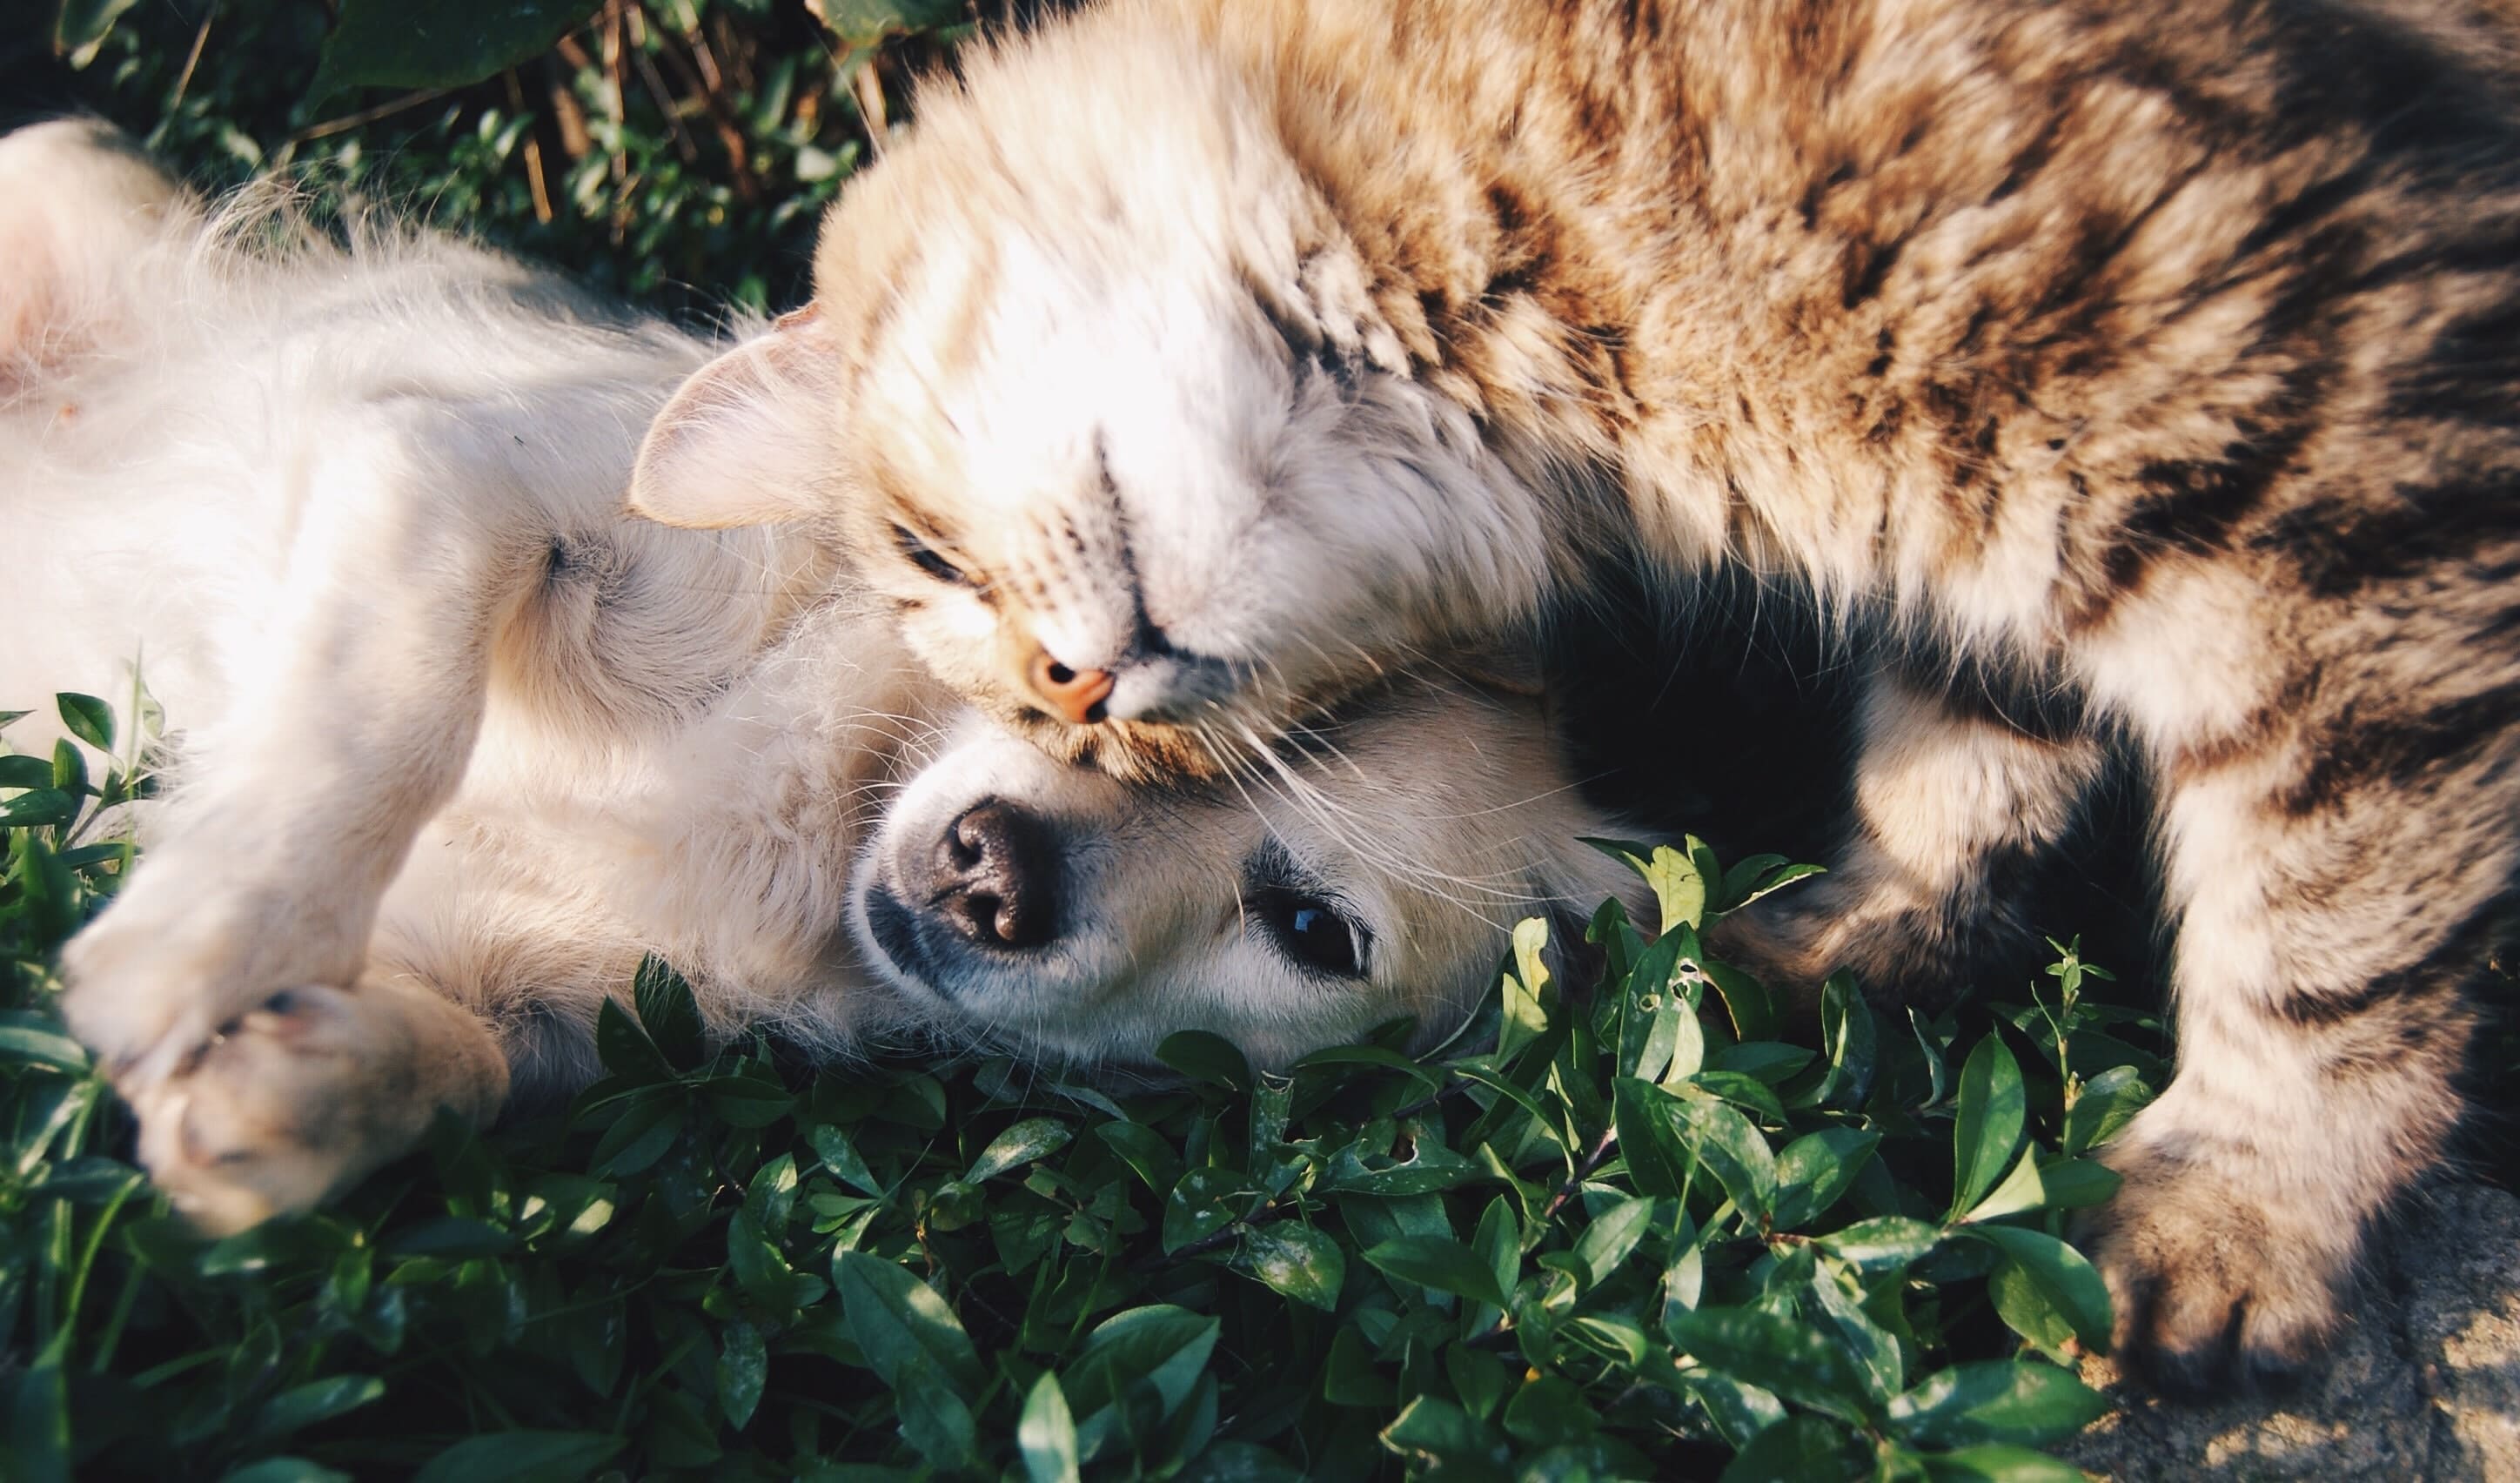 a cat and a dog laying happily in a grassy field